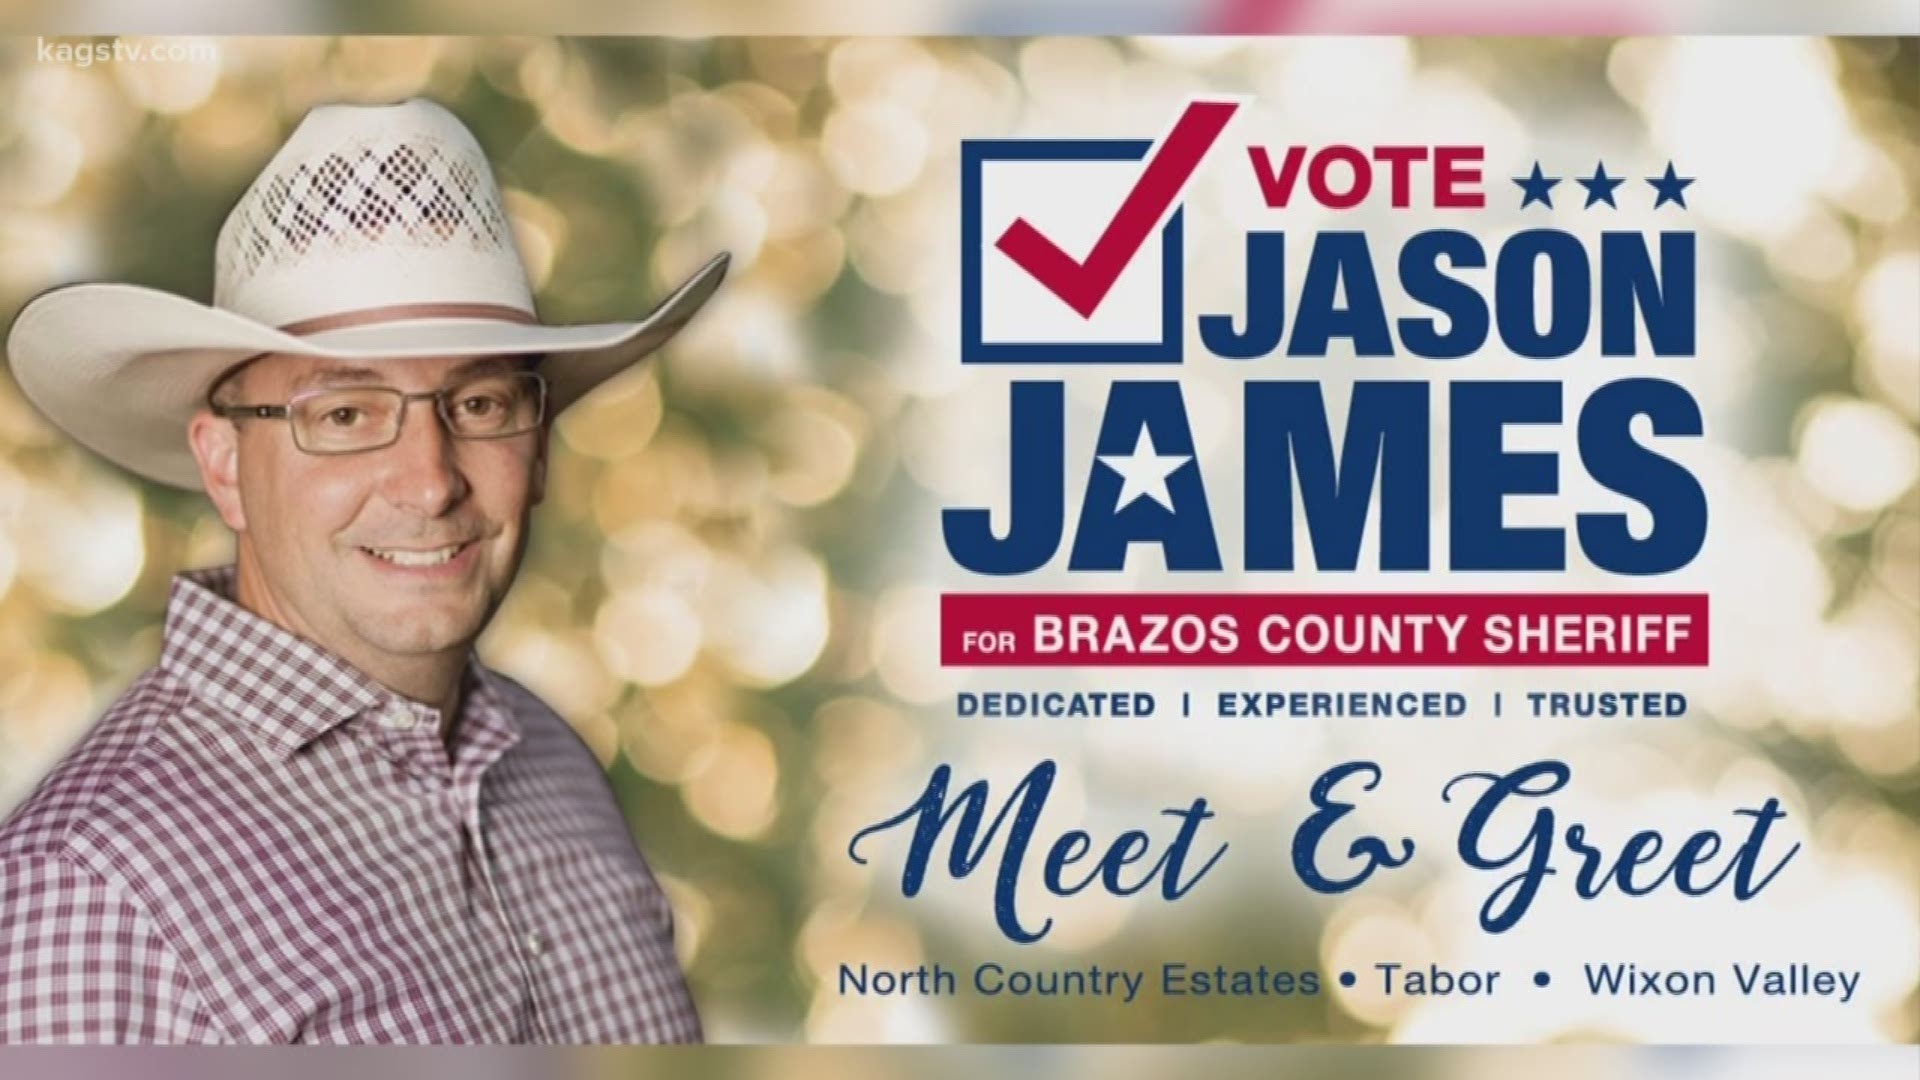 Sgt. Jason James is running against Wayne Dicky for the GOP nomination.